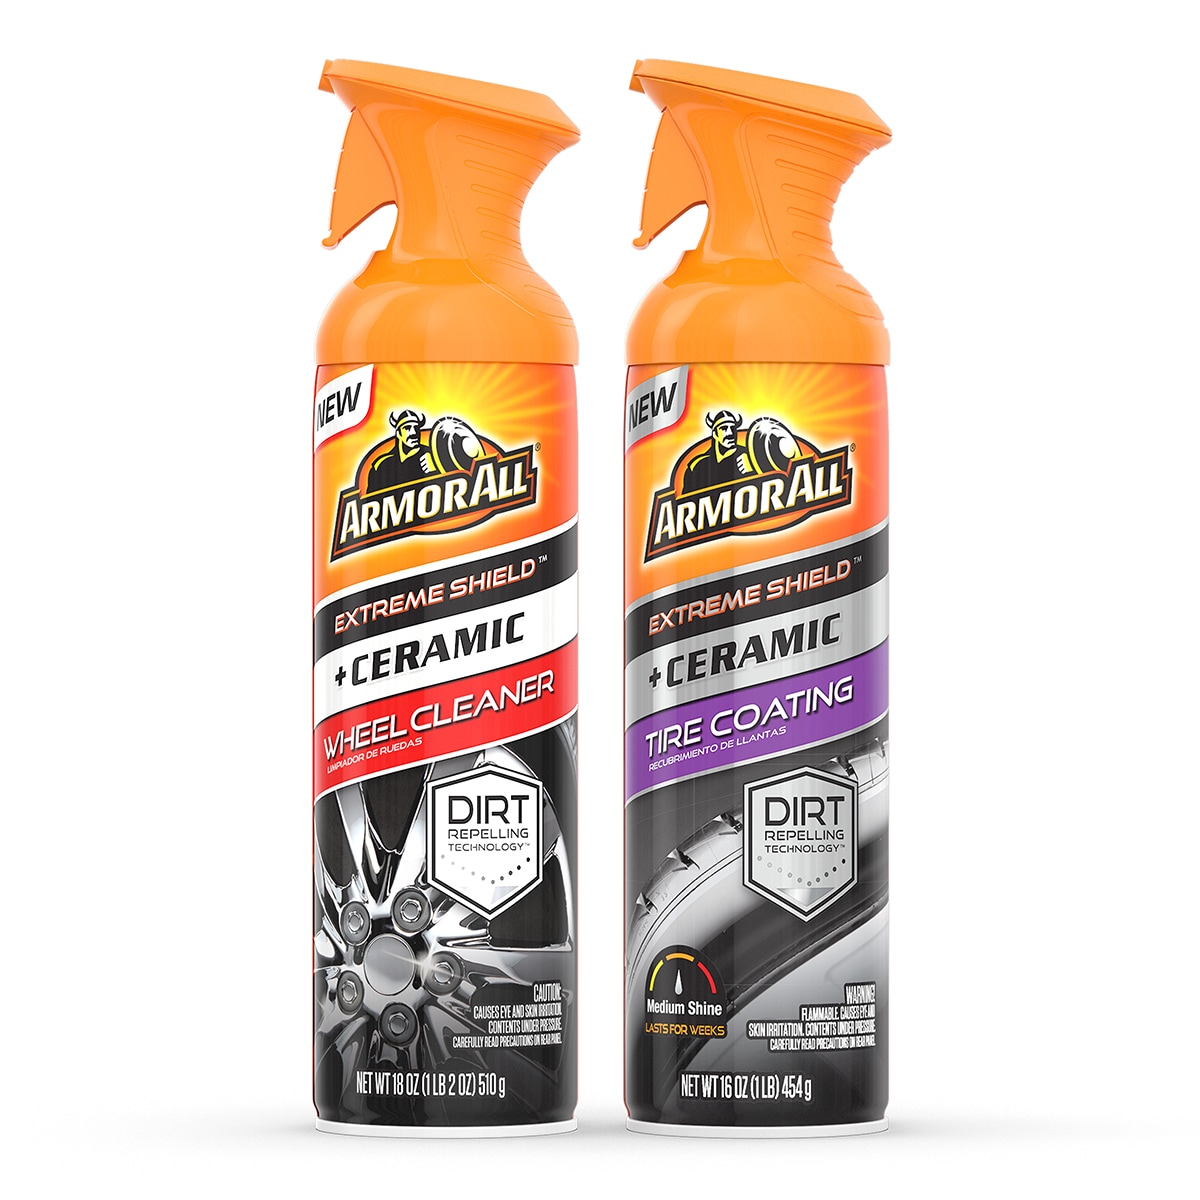  Armor All Tire Foam, Tire Cleaner Spray for Cars